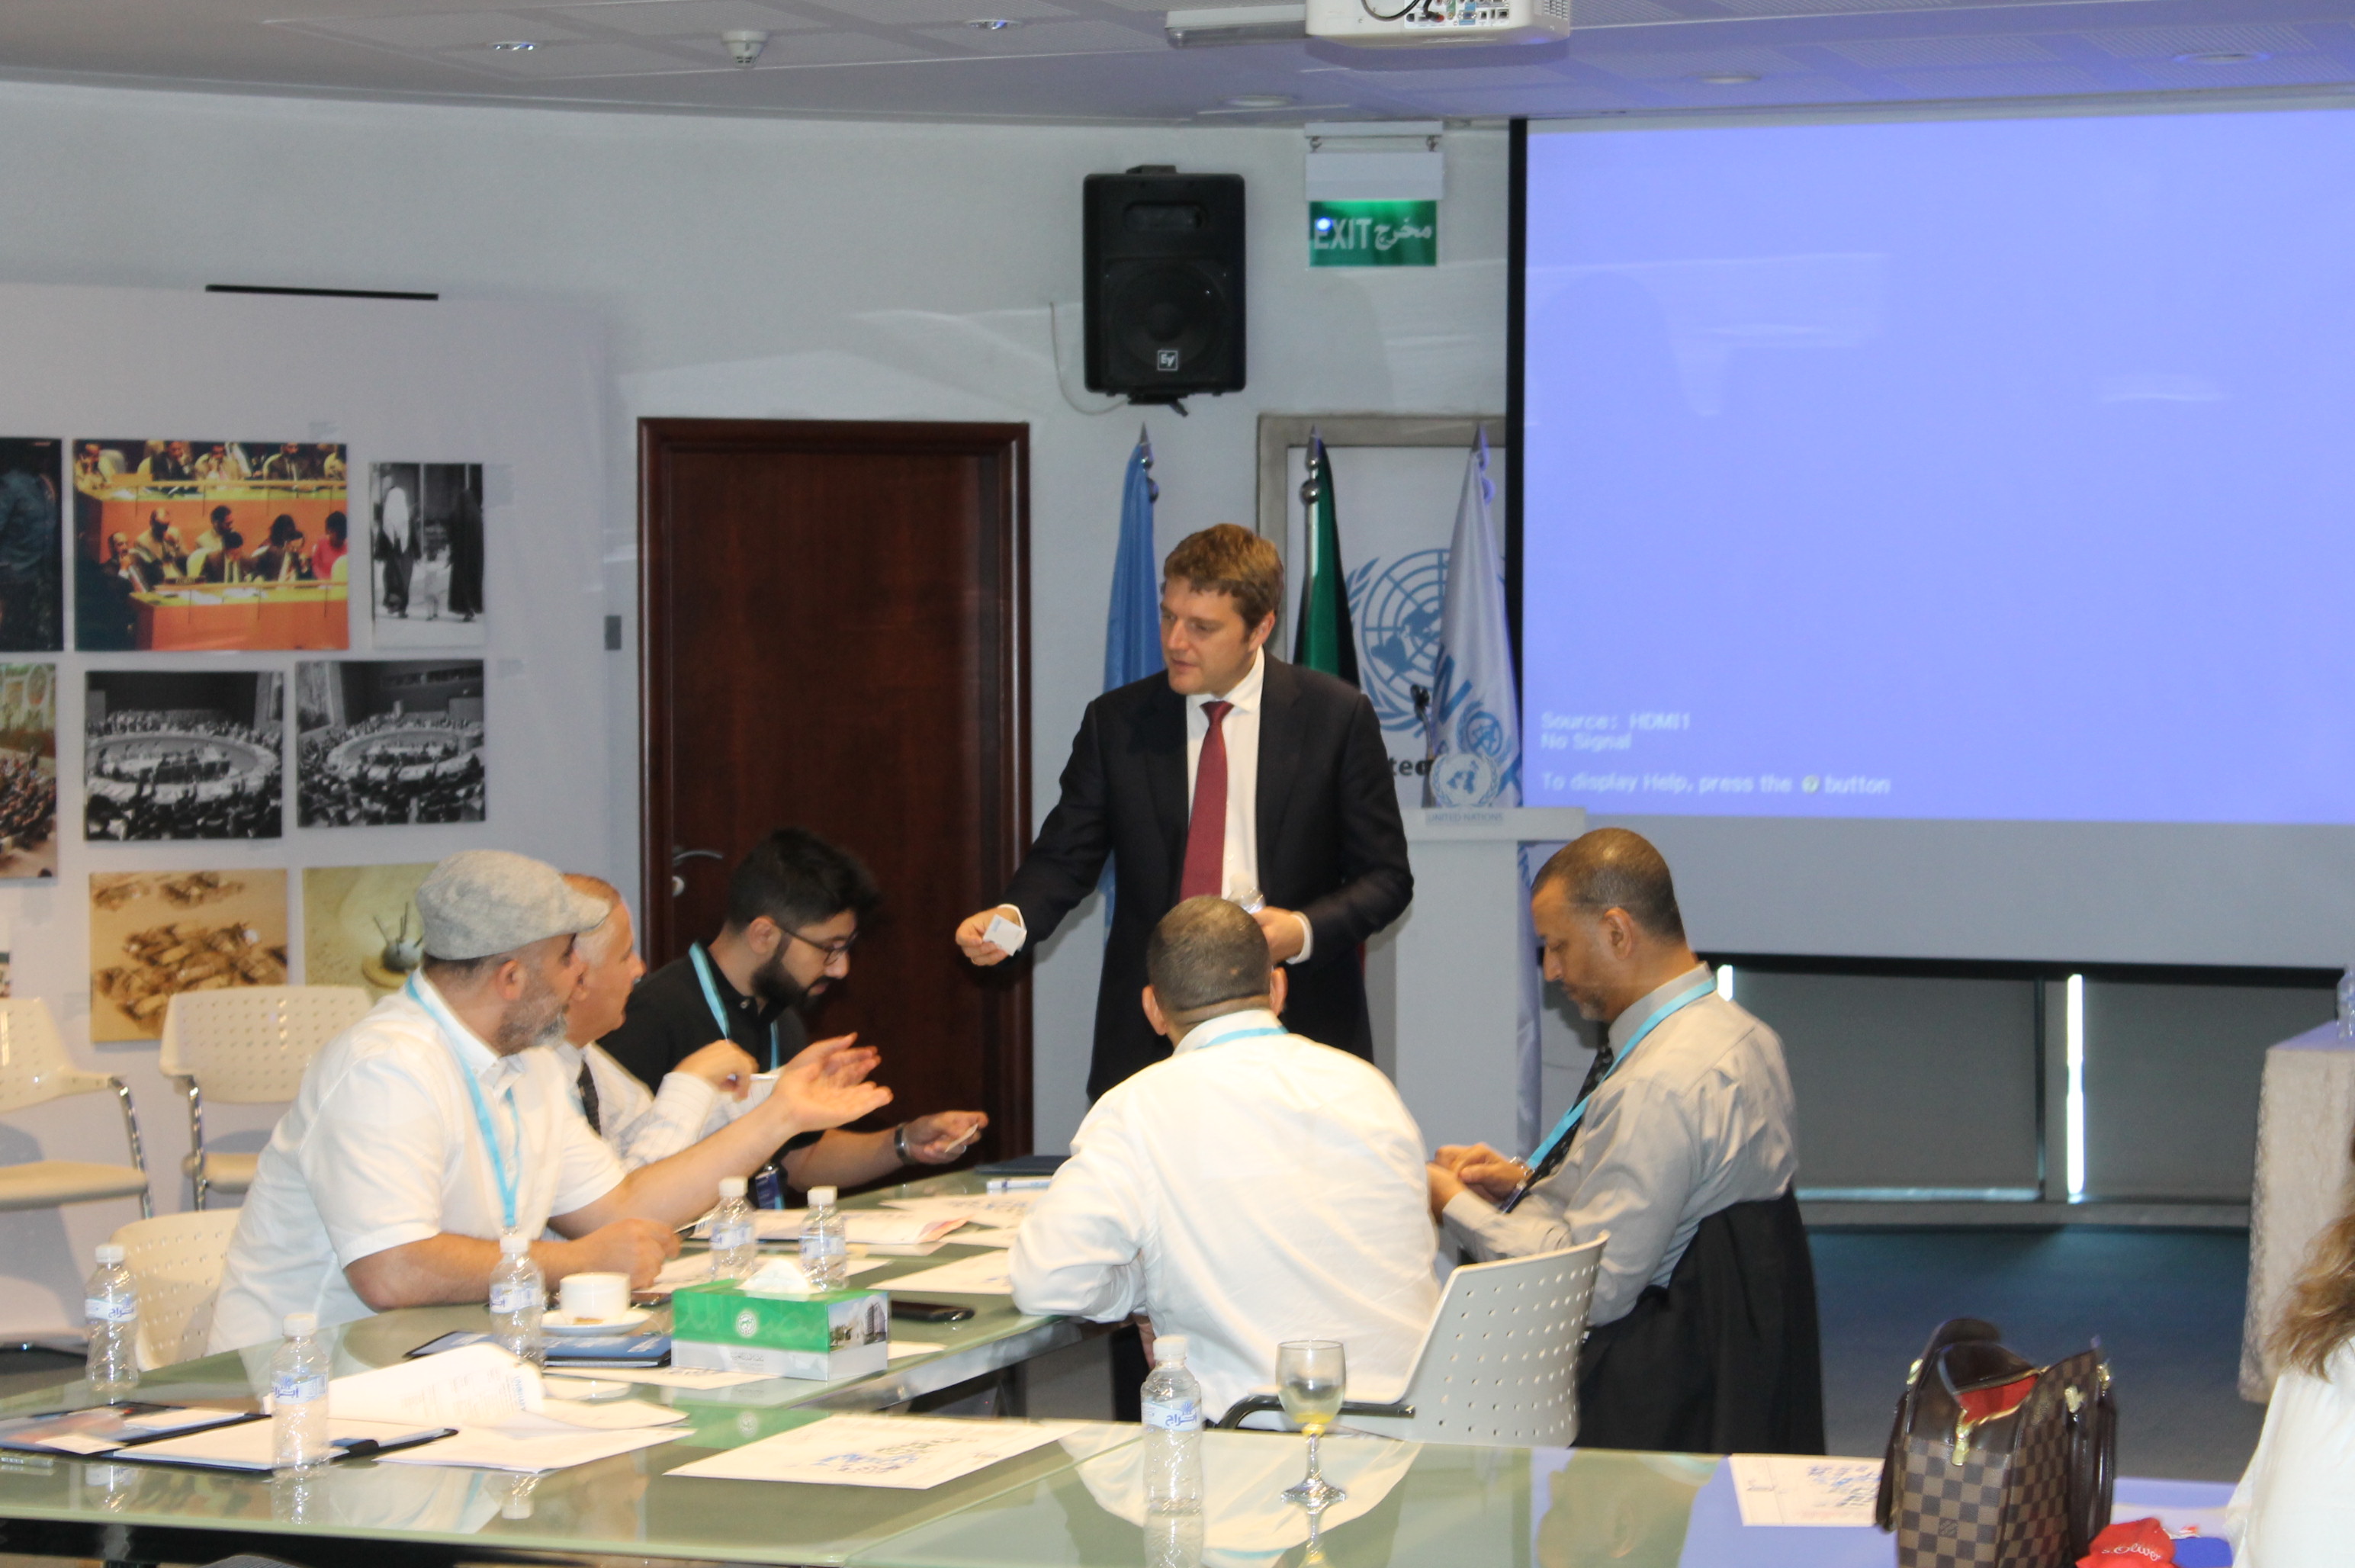 Image - Innovative Solutions for a Sustainable University workshop in Kuwait